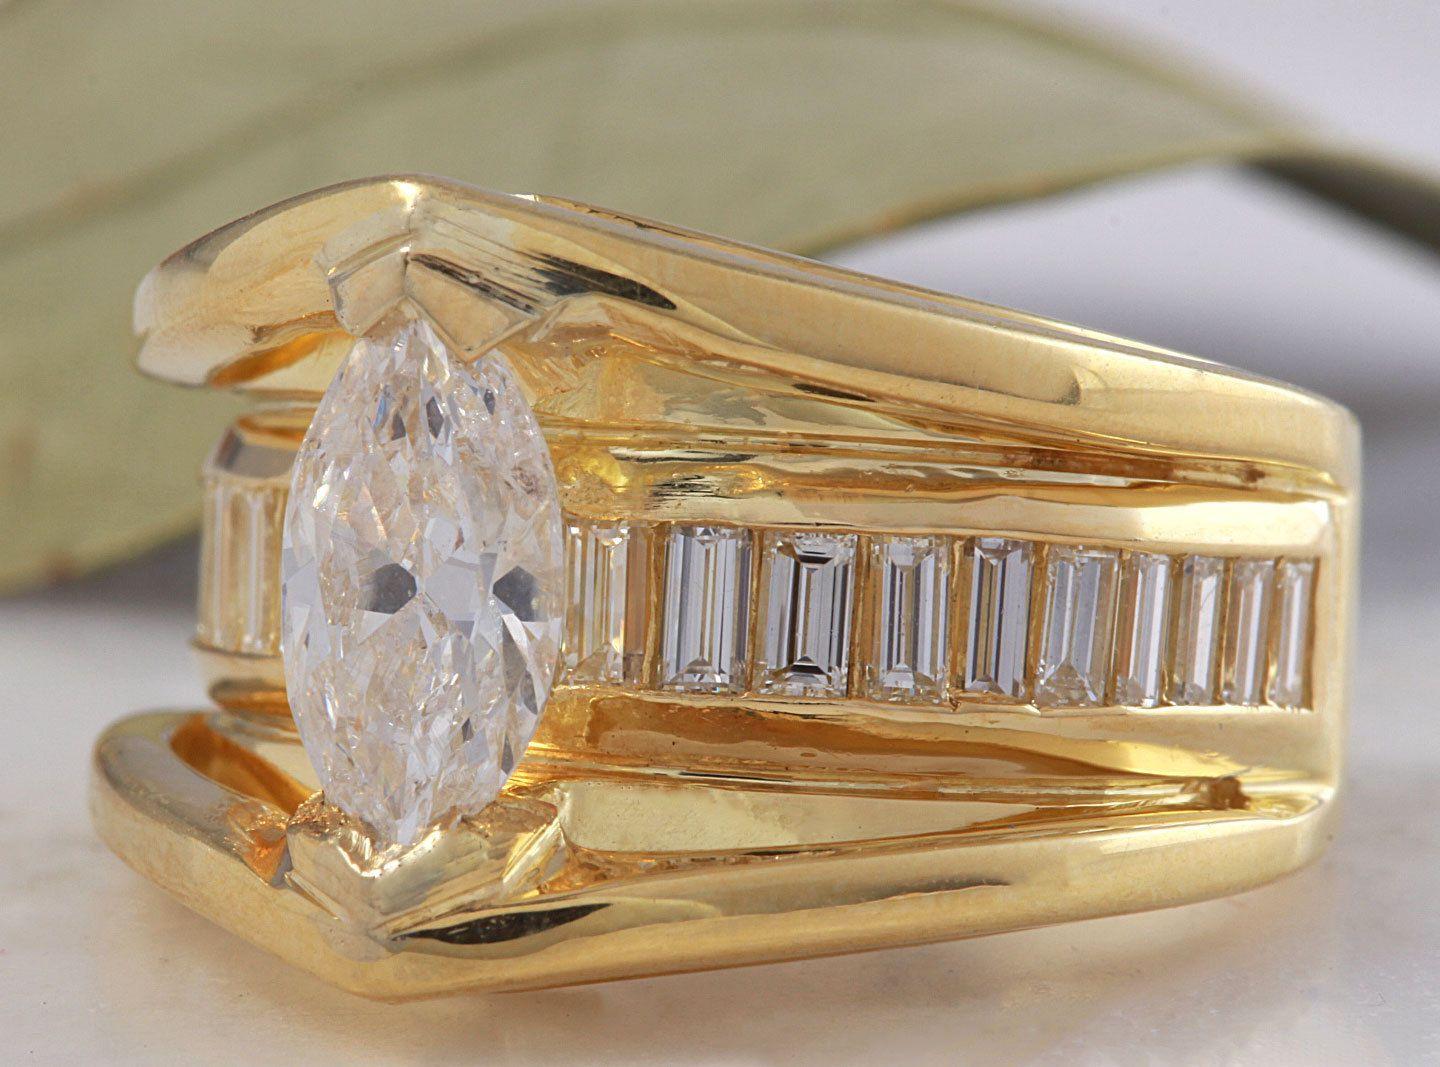 2.06 Carats Natural Diamond 18K Solid Yellow Gold Engagement Ring

Center Marquise Diamond Weight is: 1.06 carats (SI3 / F)

Baguette Diamonds Weight is: 1.00 carat (VS1 / F)

The width of the ring is: 14mm

Ring size: 6.5 (we offer free re-sizing